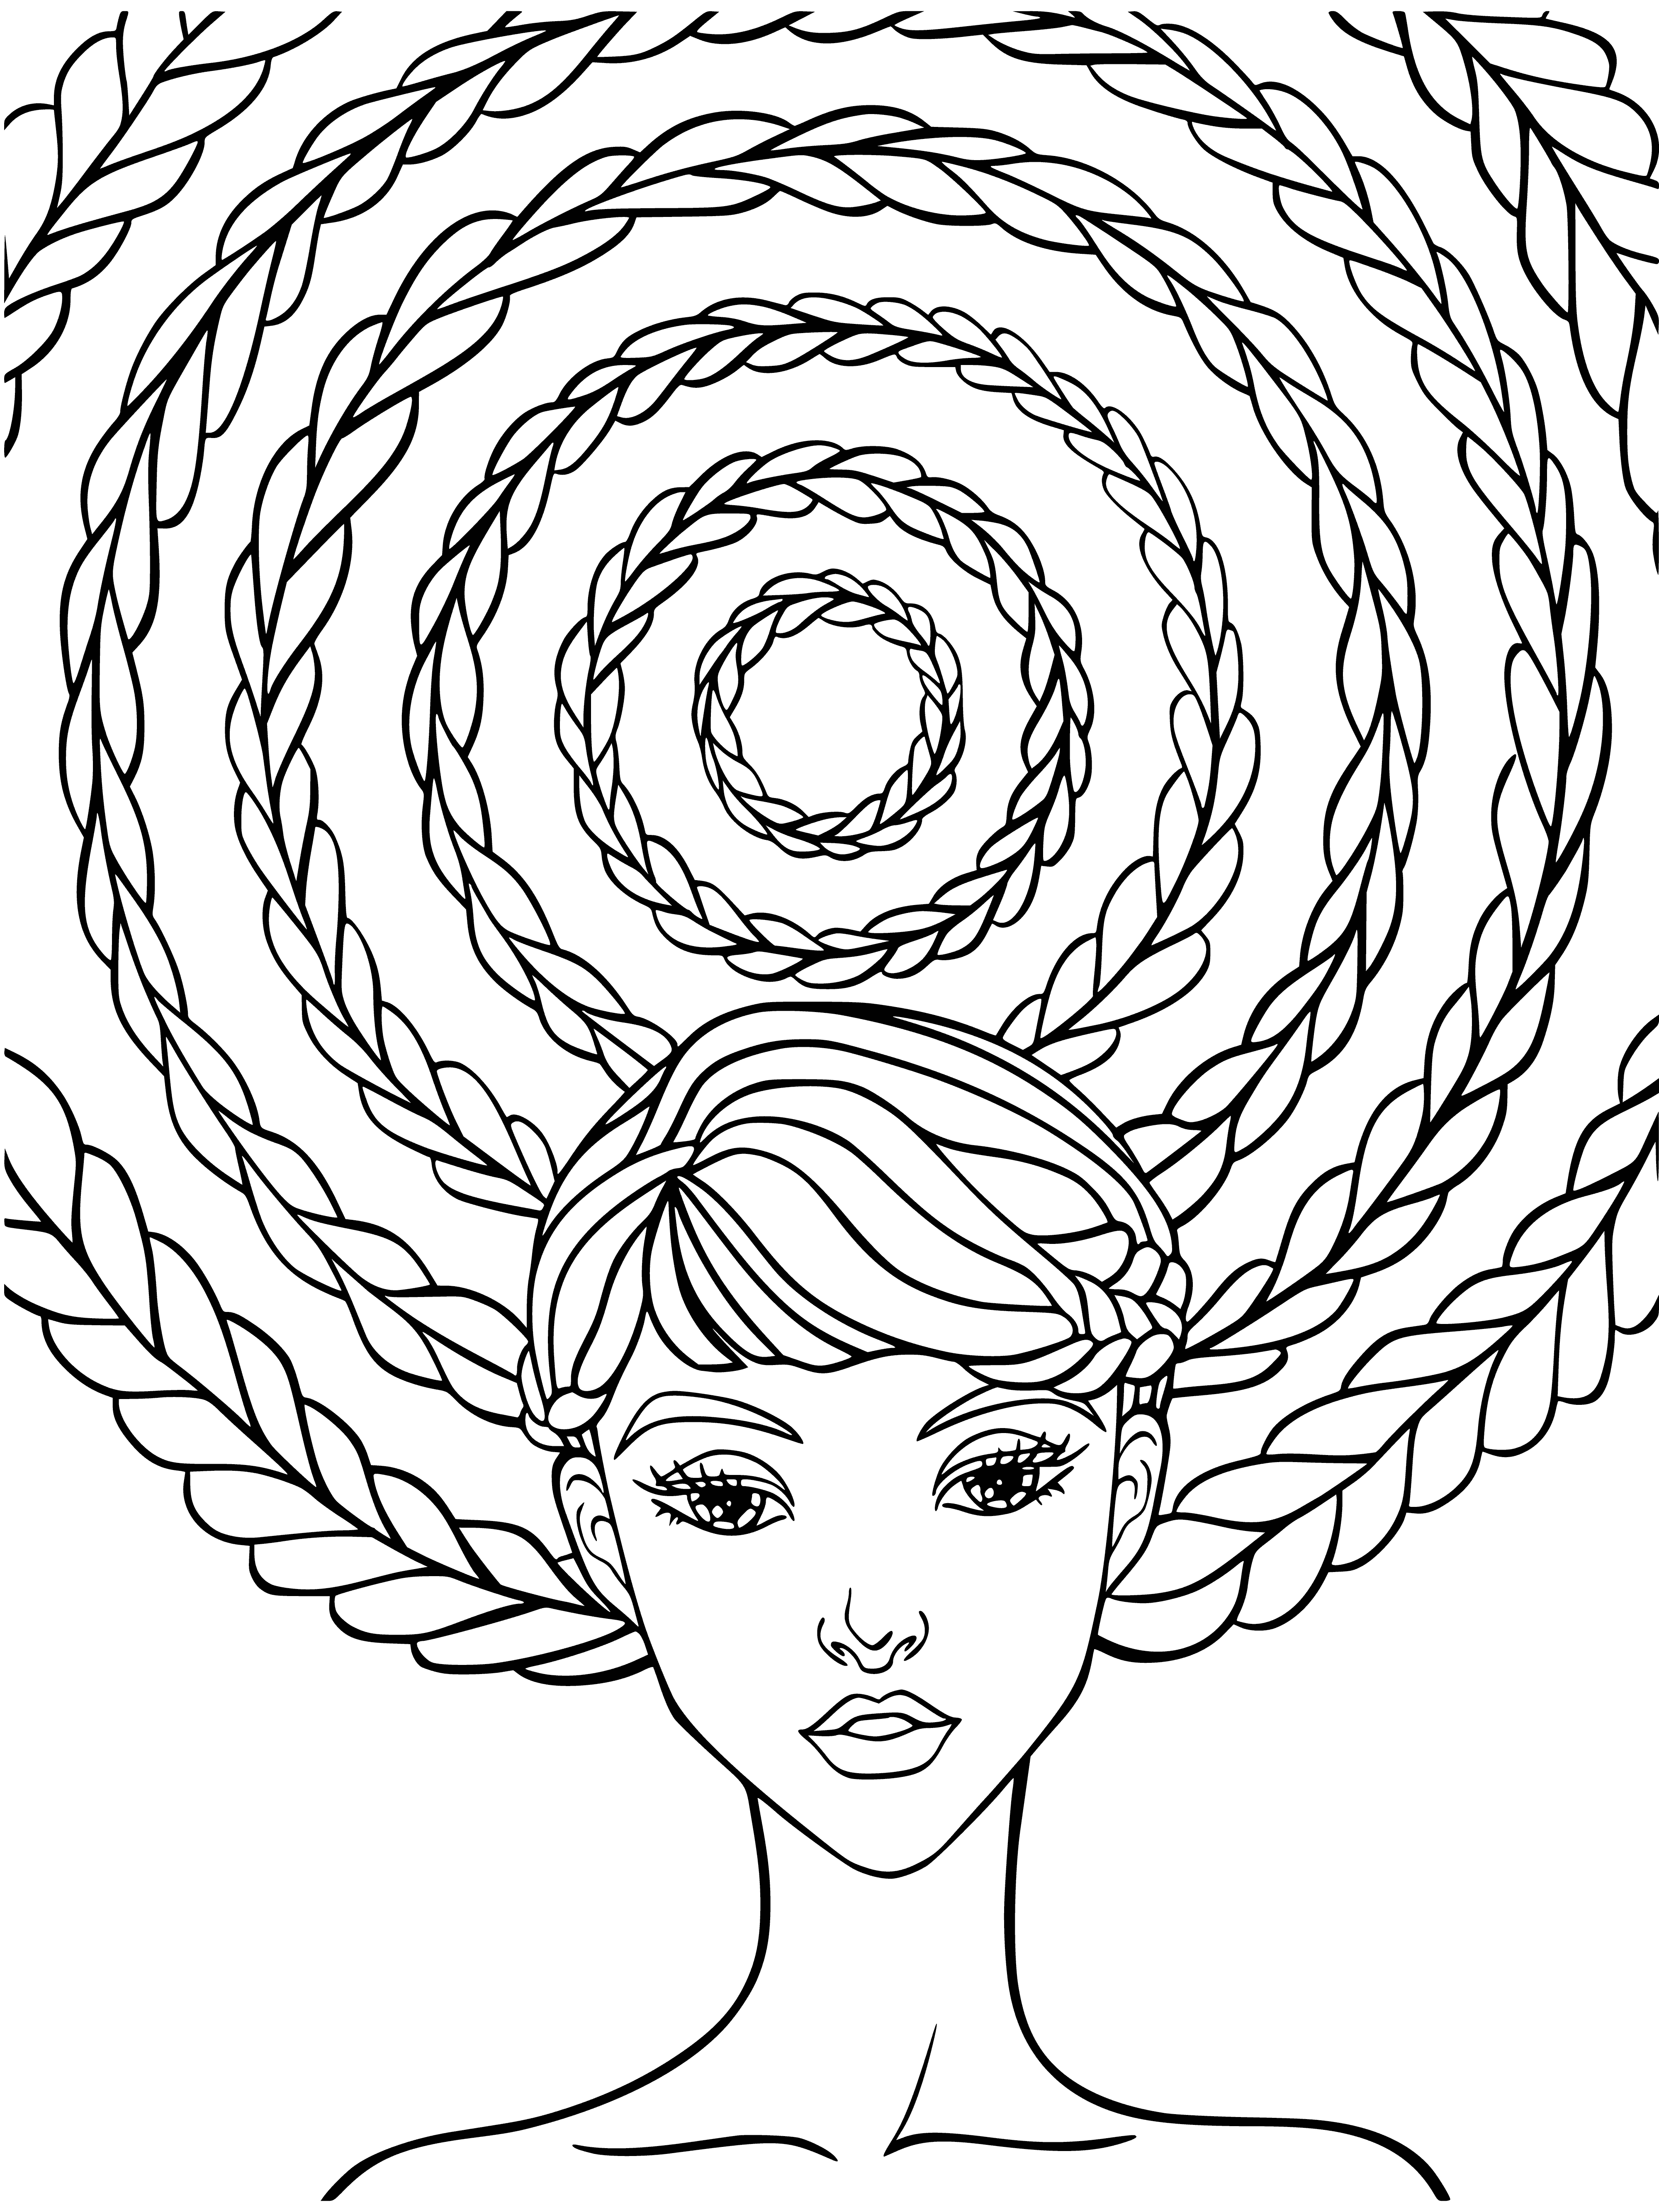 coloring page: Two happy girls with braided hair holding flowers in a peaceful blue background. #coloringpage